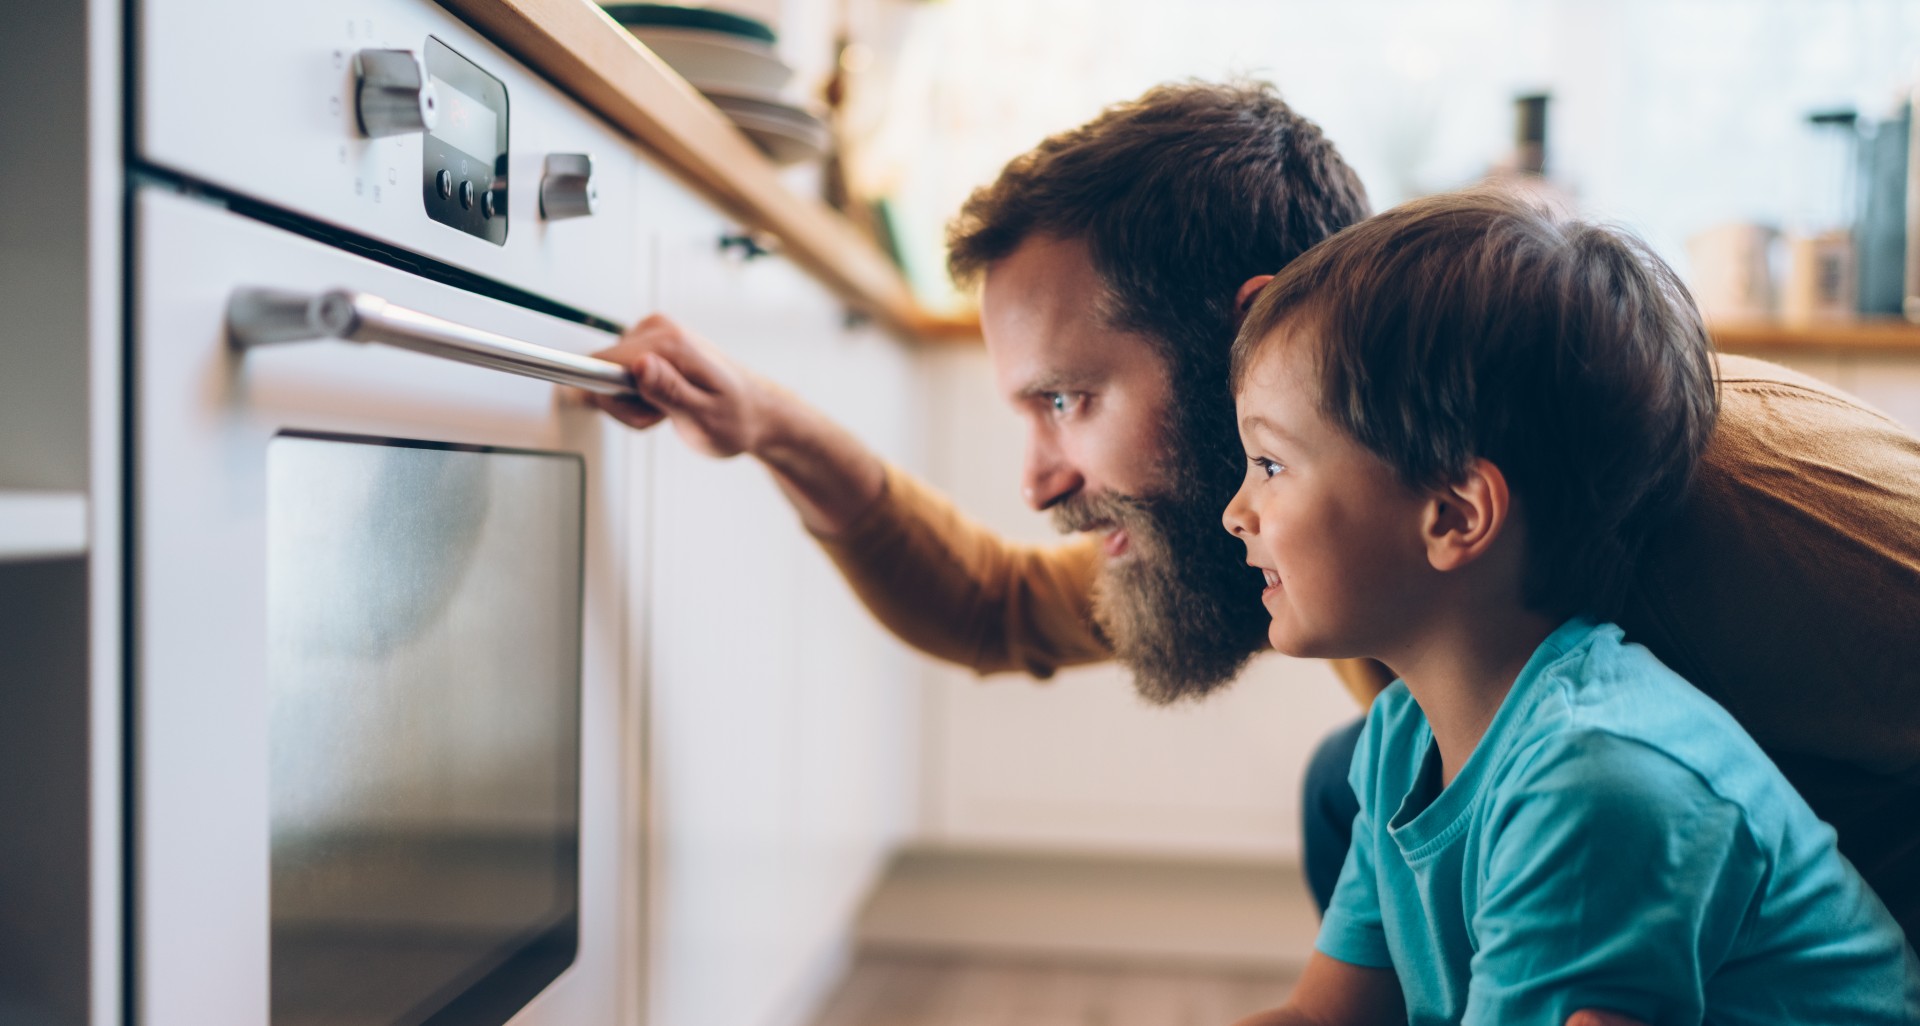 man and child looking at food cooking in an oven